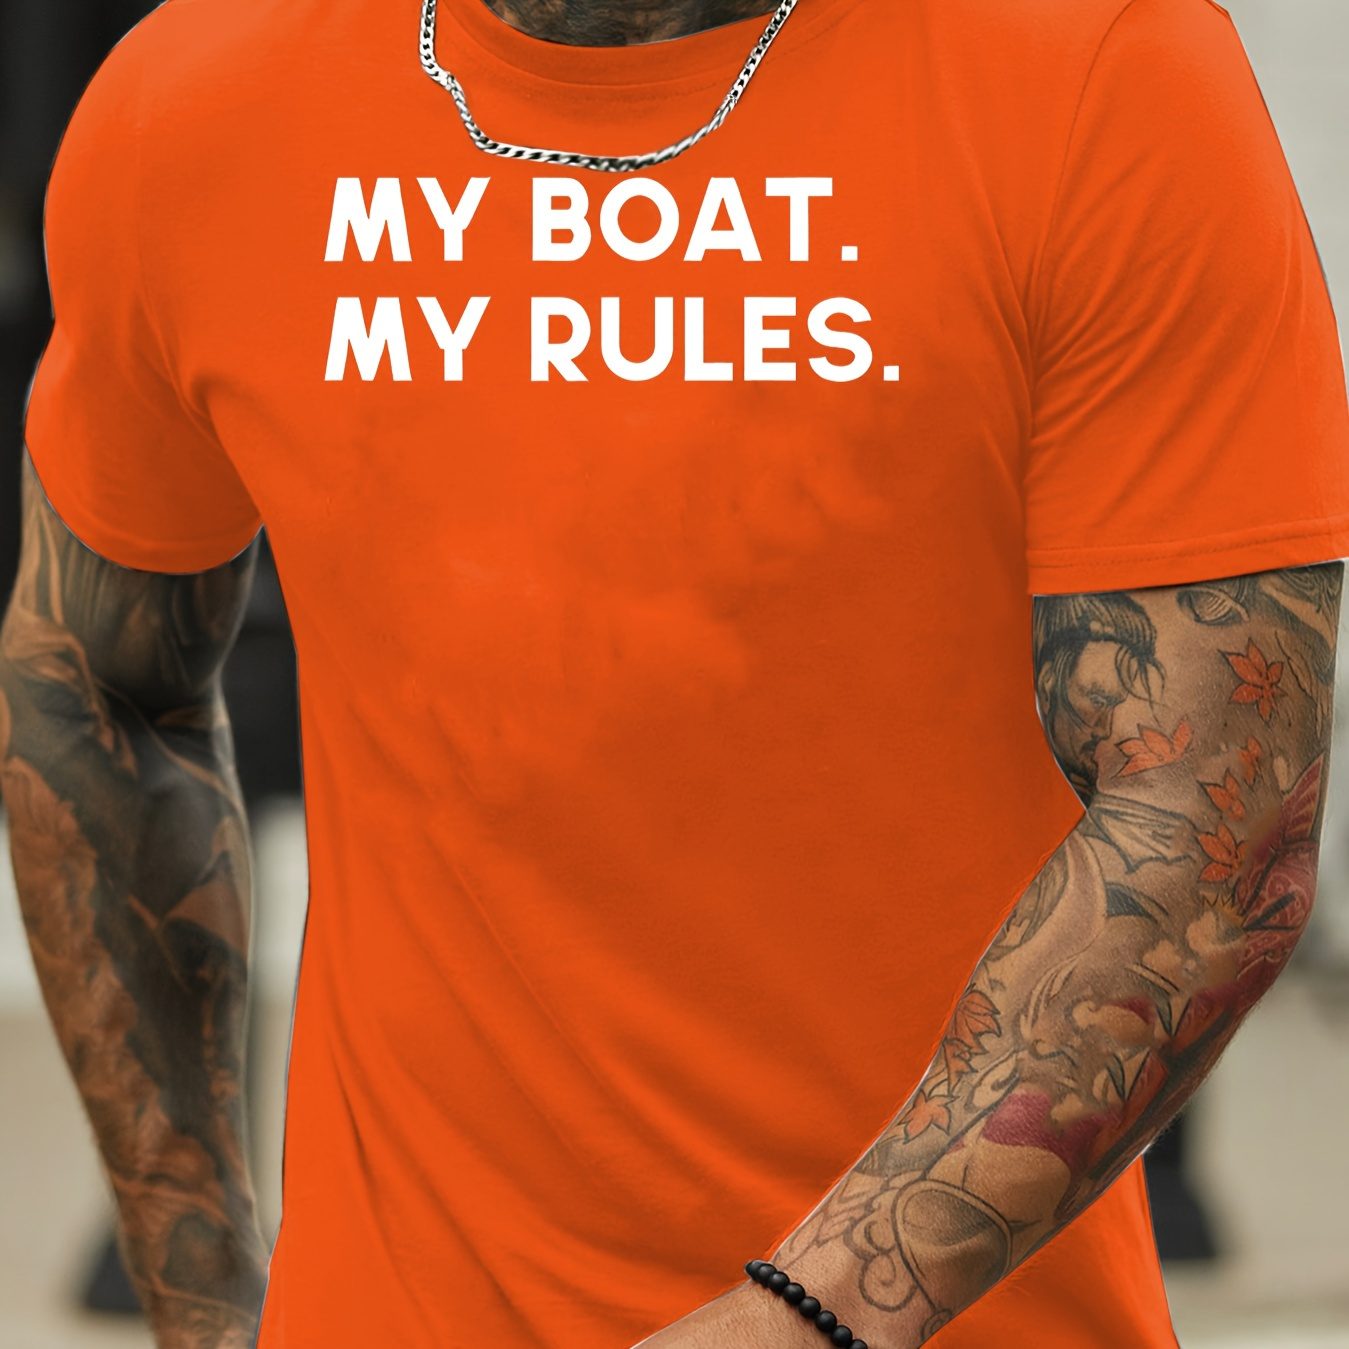 

My Boat My Rules Men's Fashion Graphic Short Sleeve T-shirt For Summer